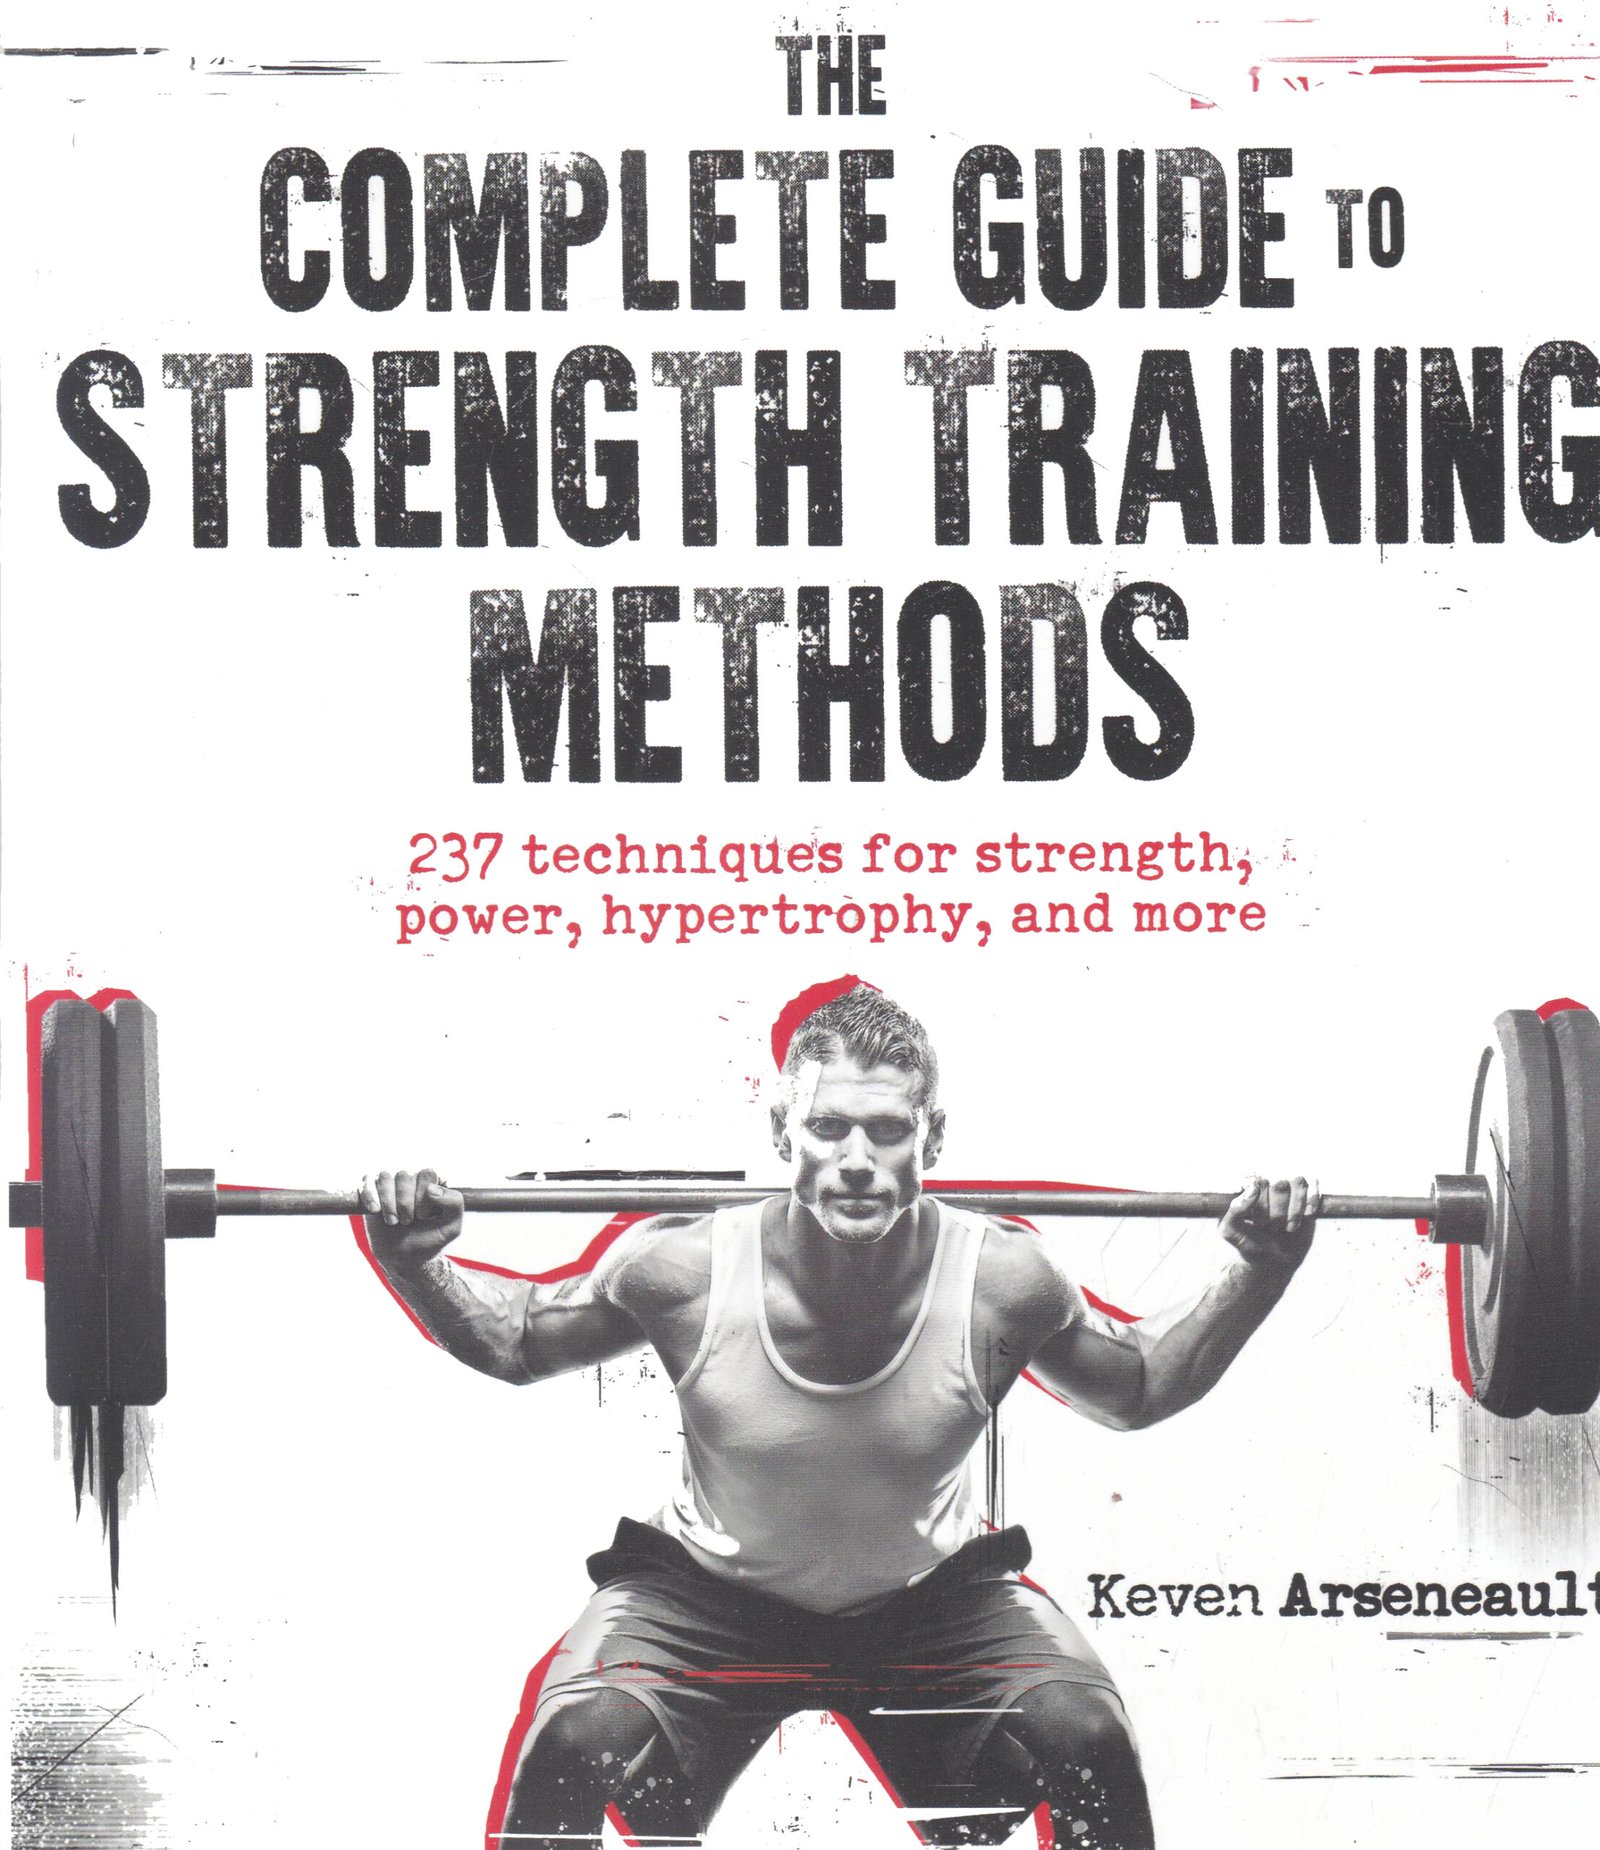 The Complete Guide to Training Power for Health and Performance